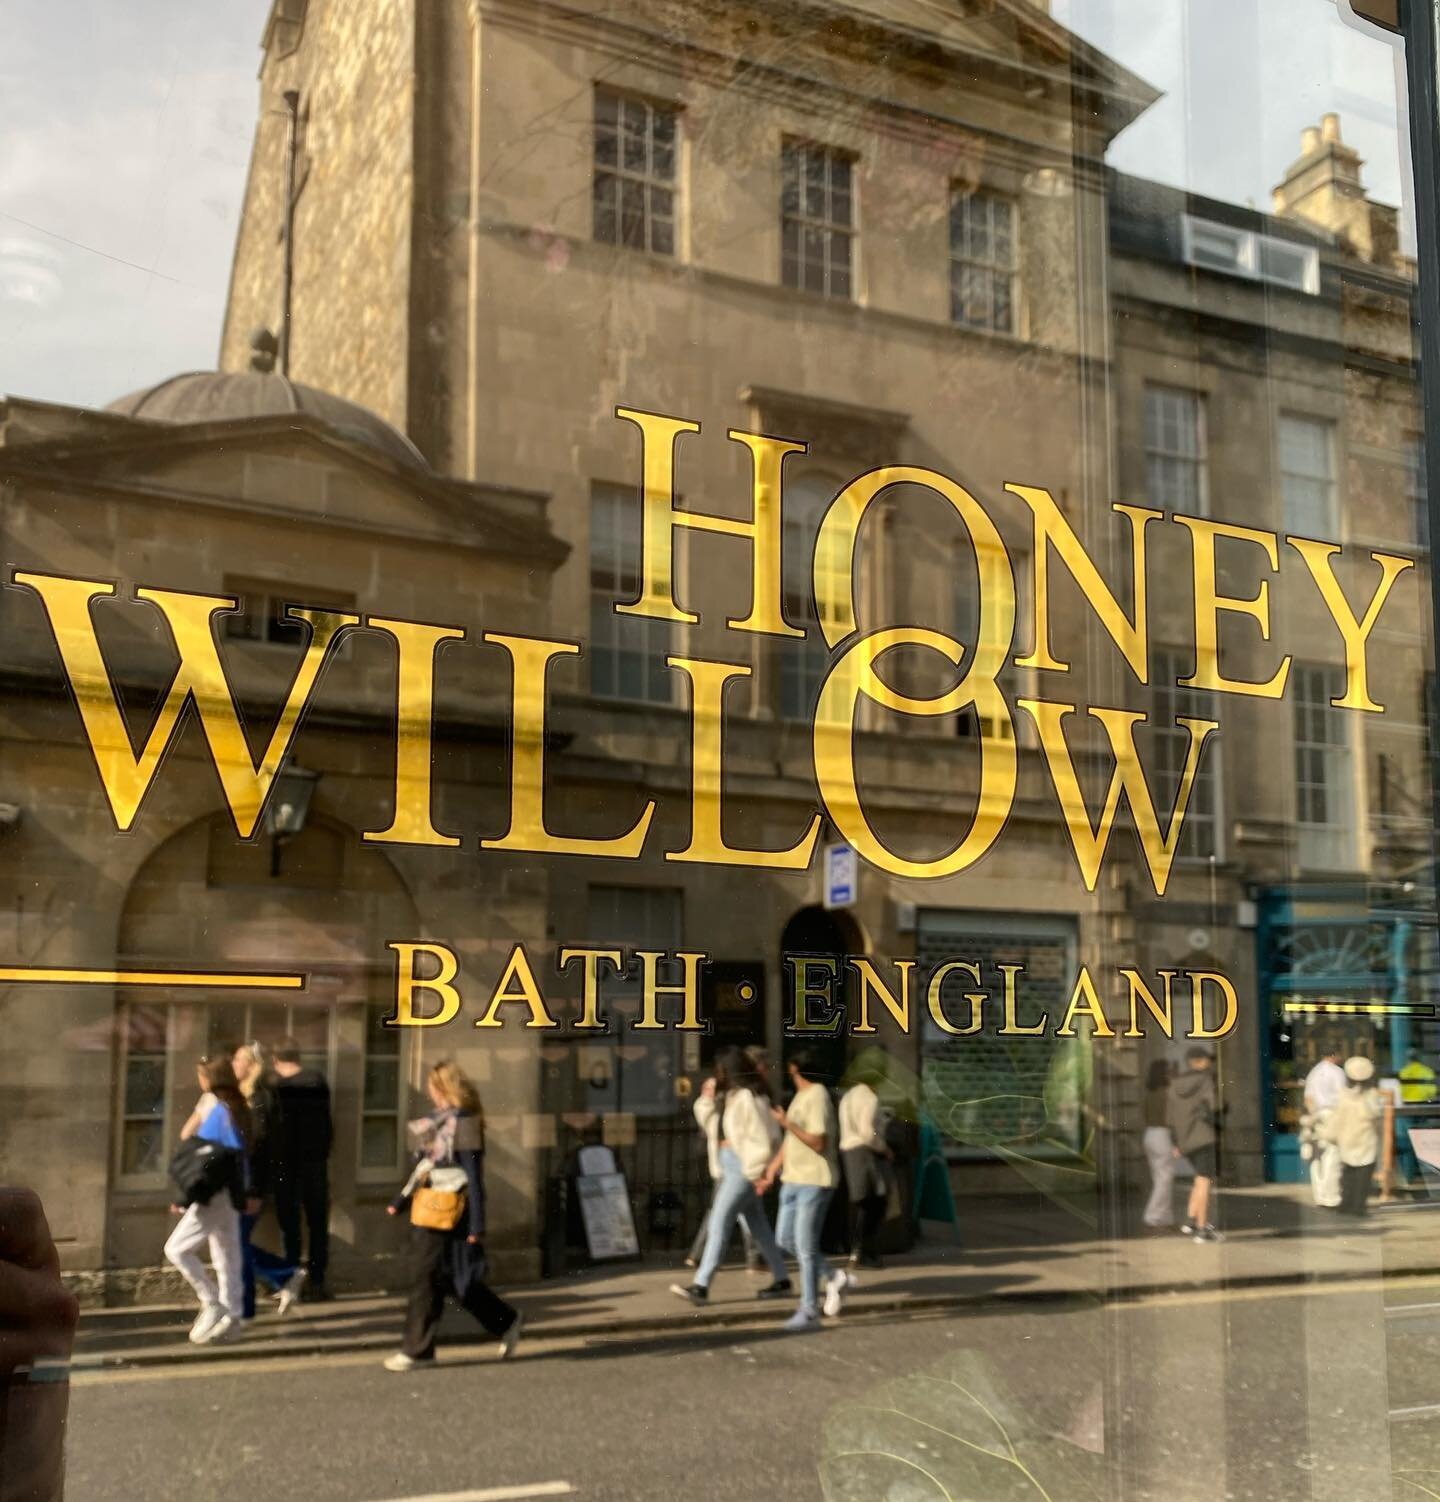 Mirror gold leaf lettering for @honeywillowjewellery 

#goldleaf #traditionalsignwriting #romanbath #signwriter #signpainter #Bath